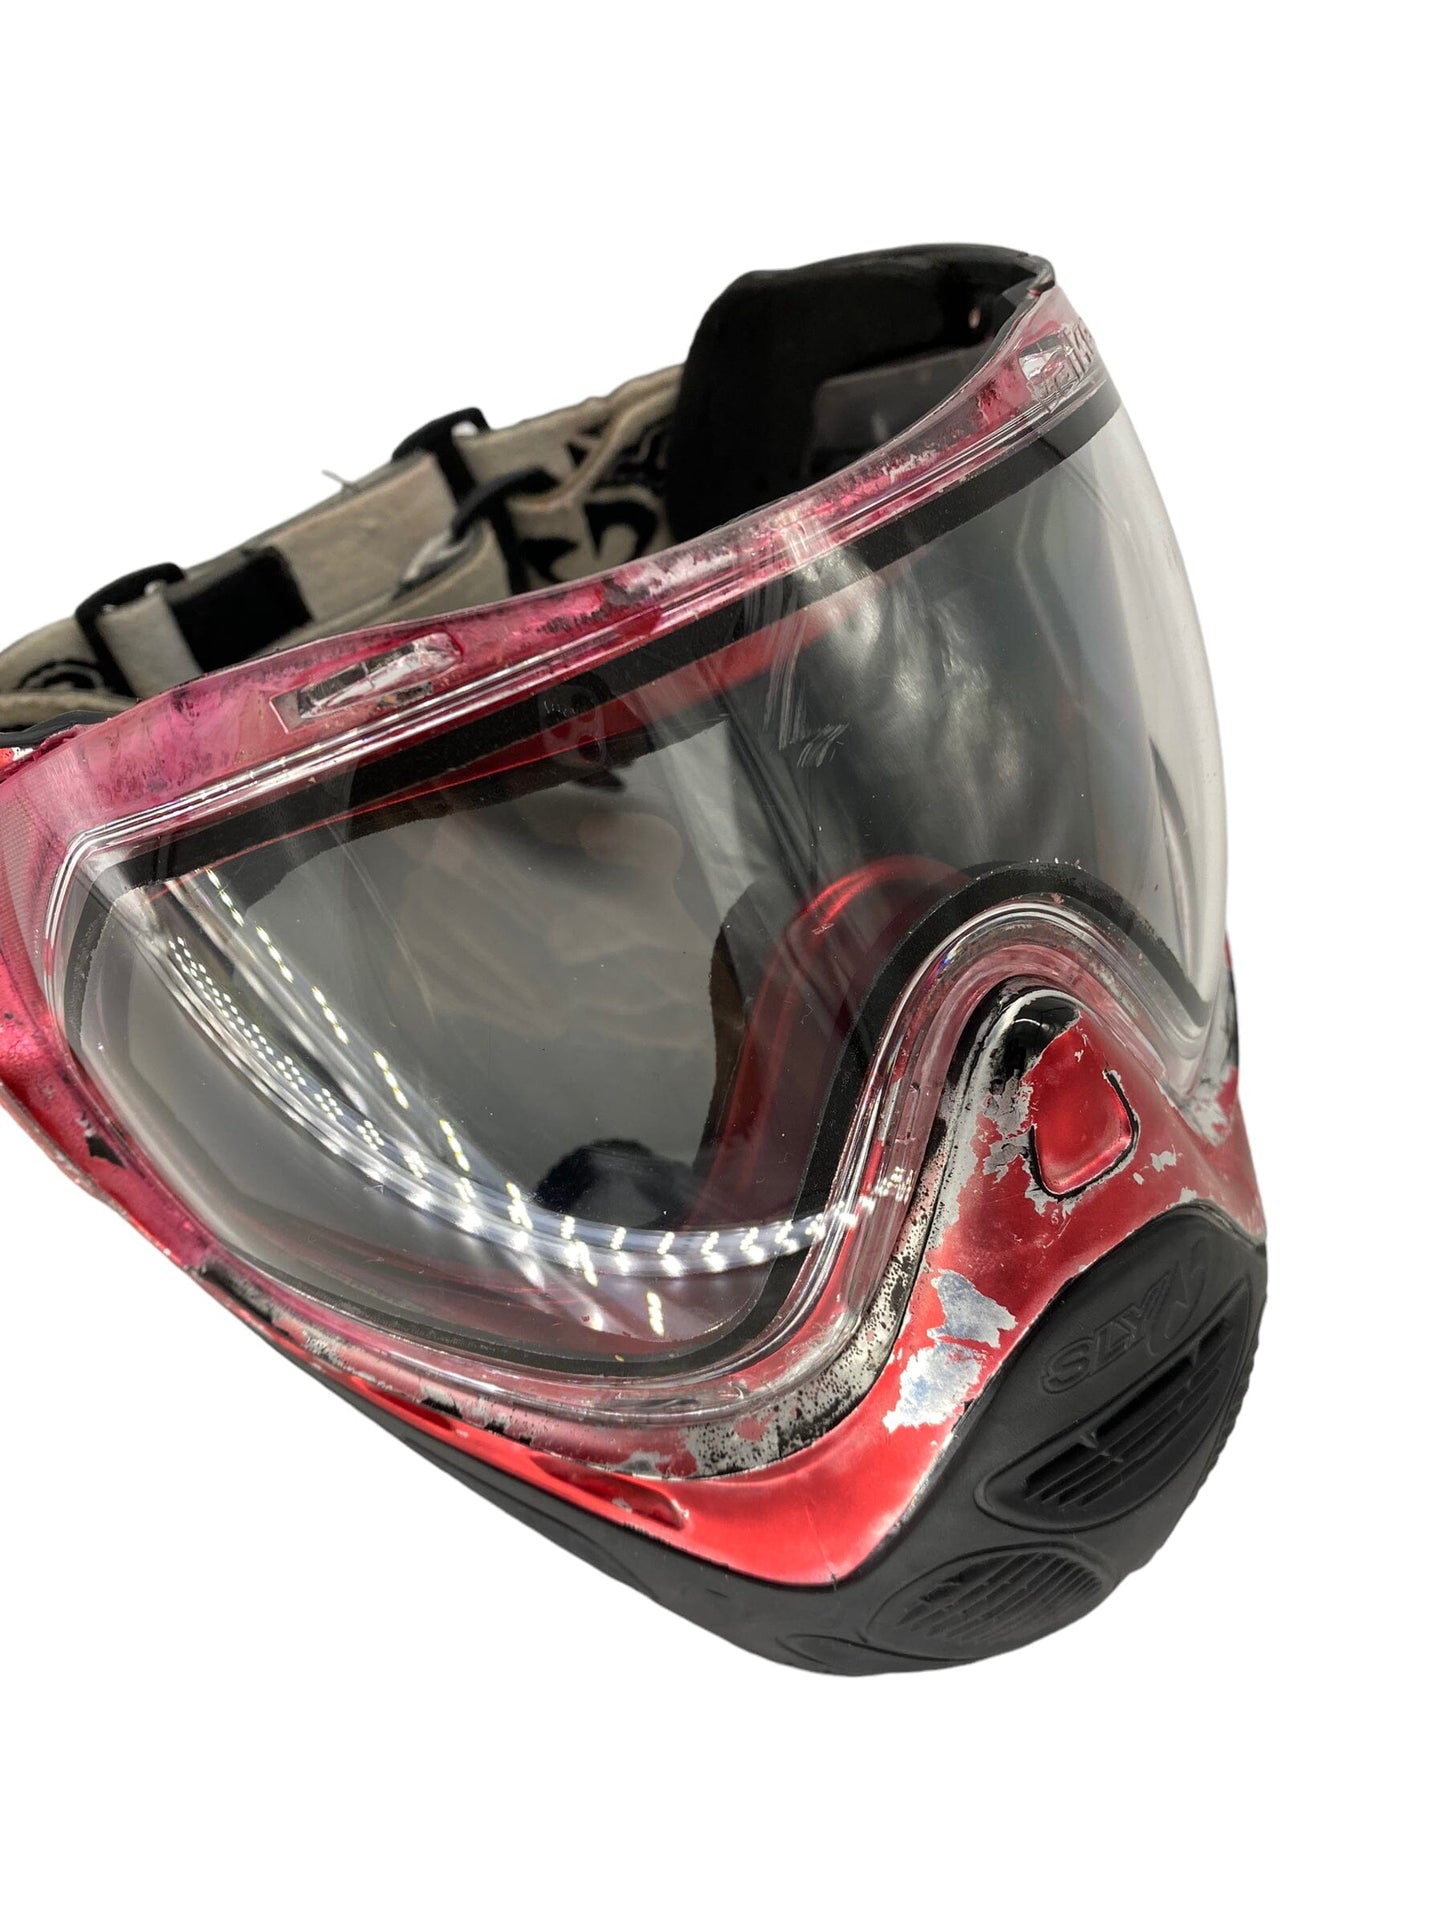 Used Sly Paintball Mask Goggle Paintball Gun from CPXBrosPaintball Buy/Sell/Trade Paintball Markers, Paintball Hoppers, Paintball Masks, and Hormesis Headbands